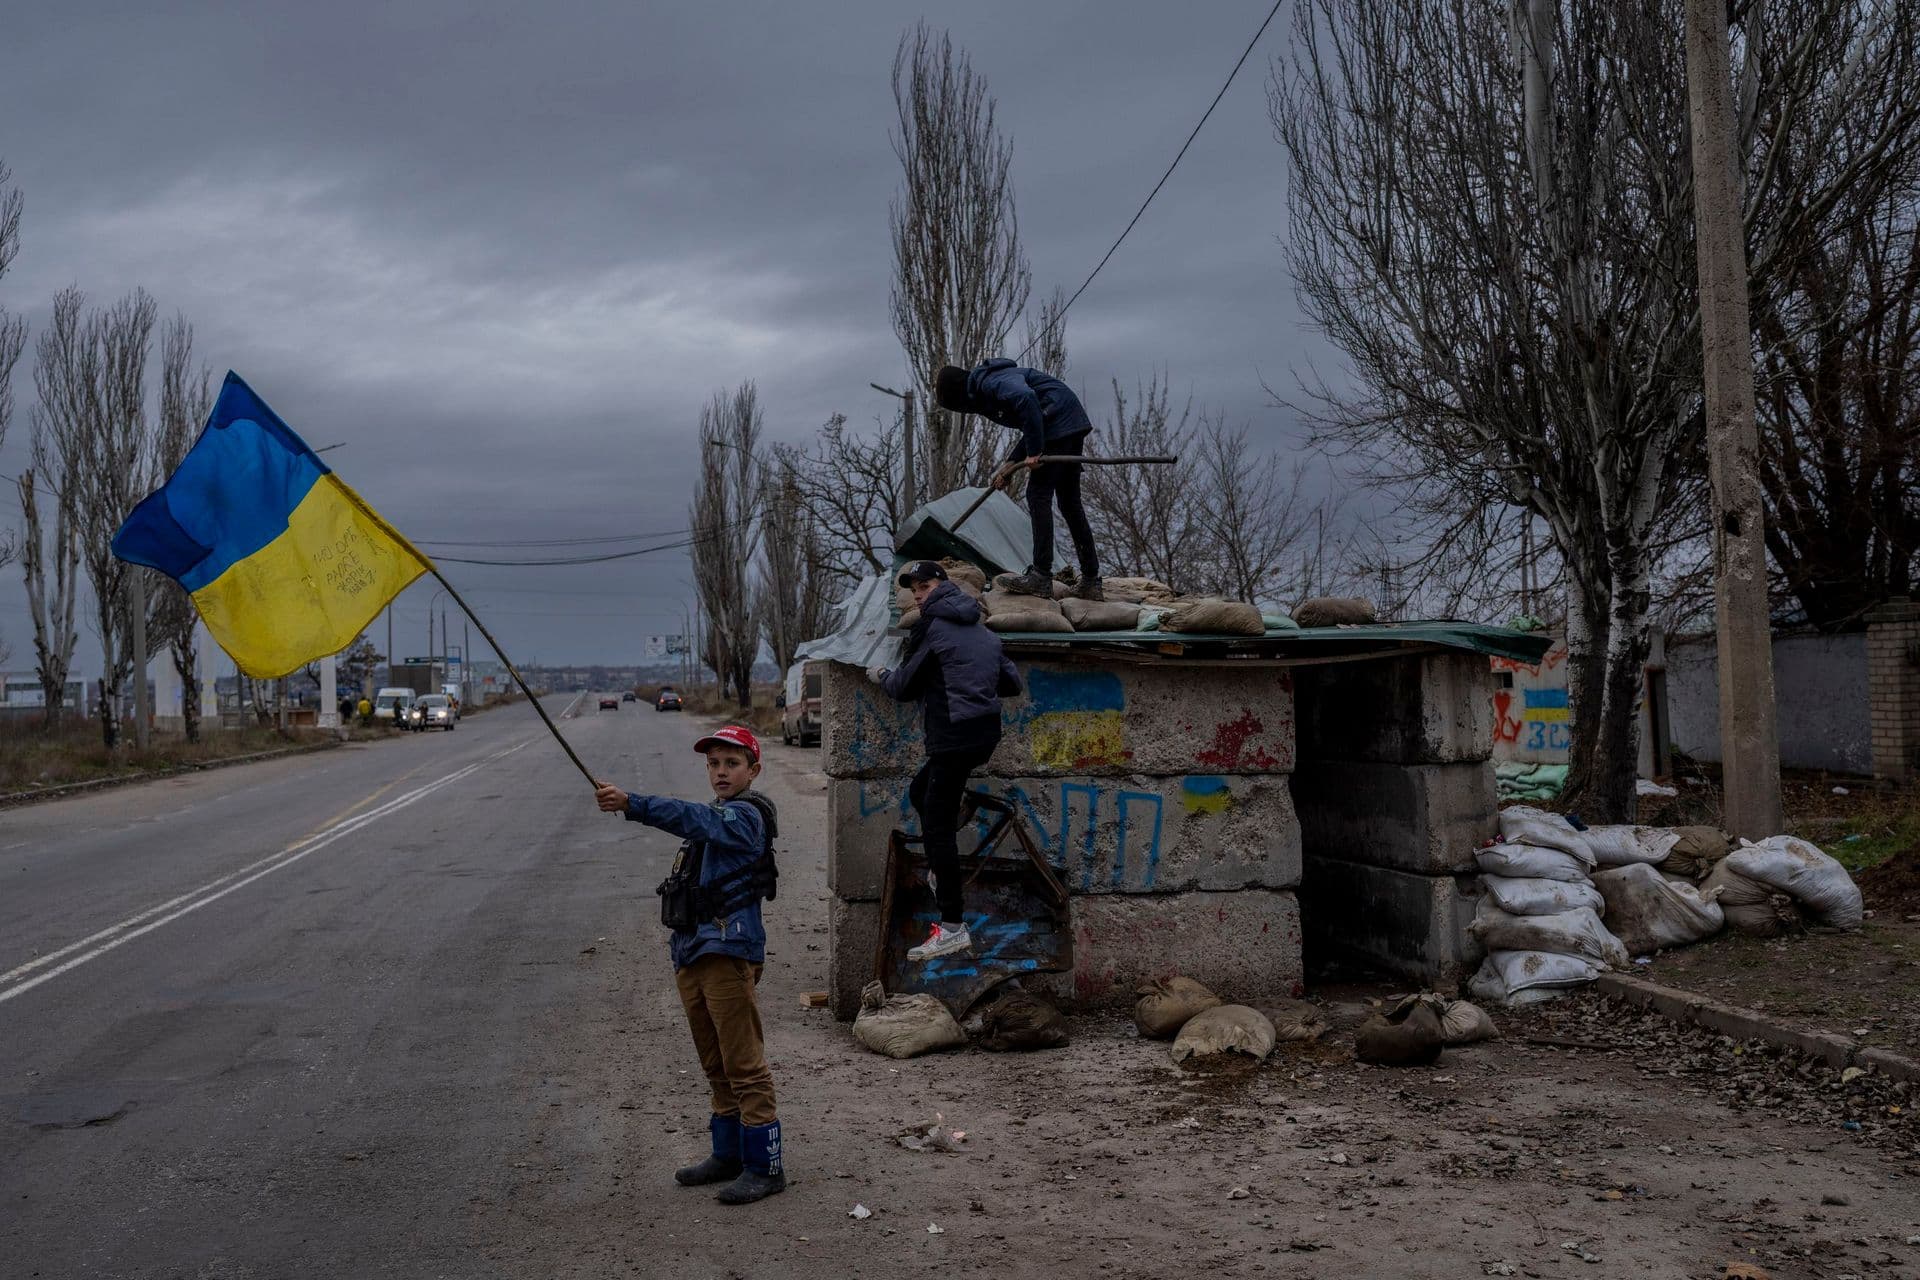 Ukrainian children play at an abandoned checkpoint in Kherson